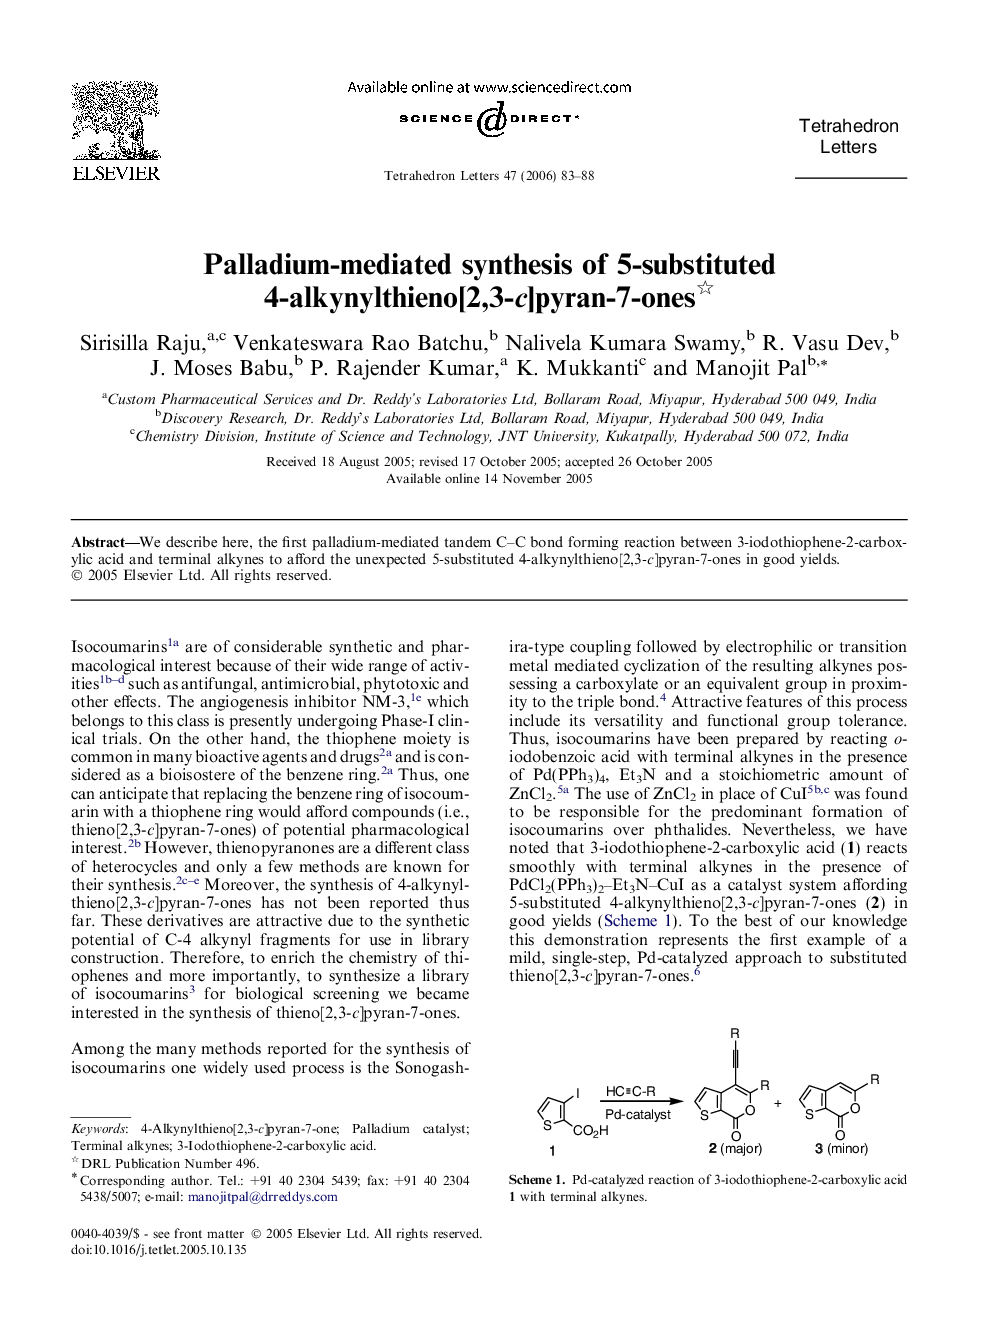 Palladium-mediated synthesis of 5-substituted 4-alkynylthieno[2,3-c]pyran-7-ones